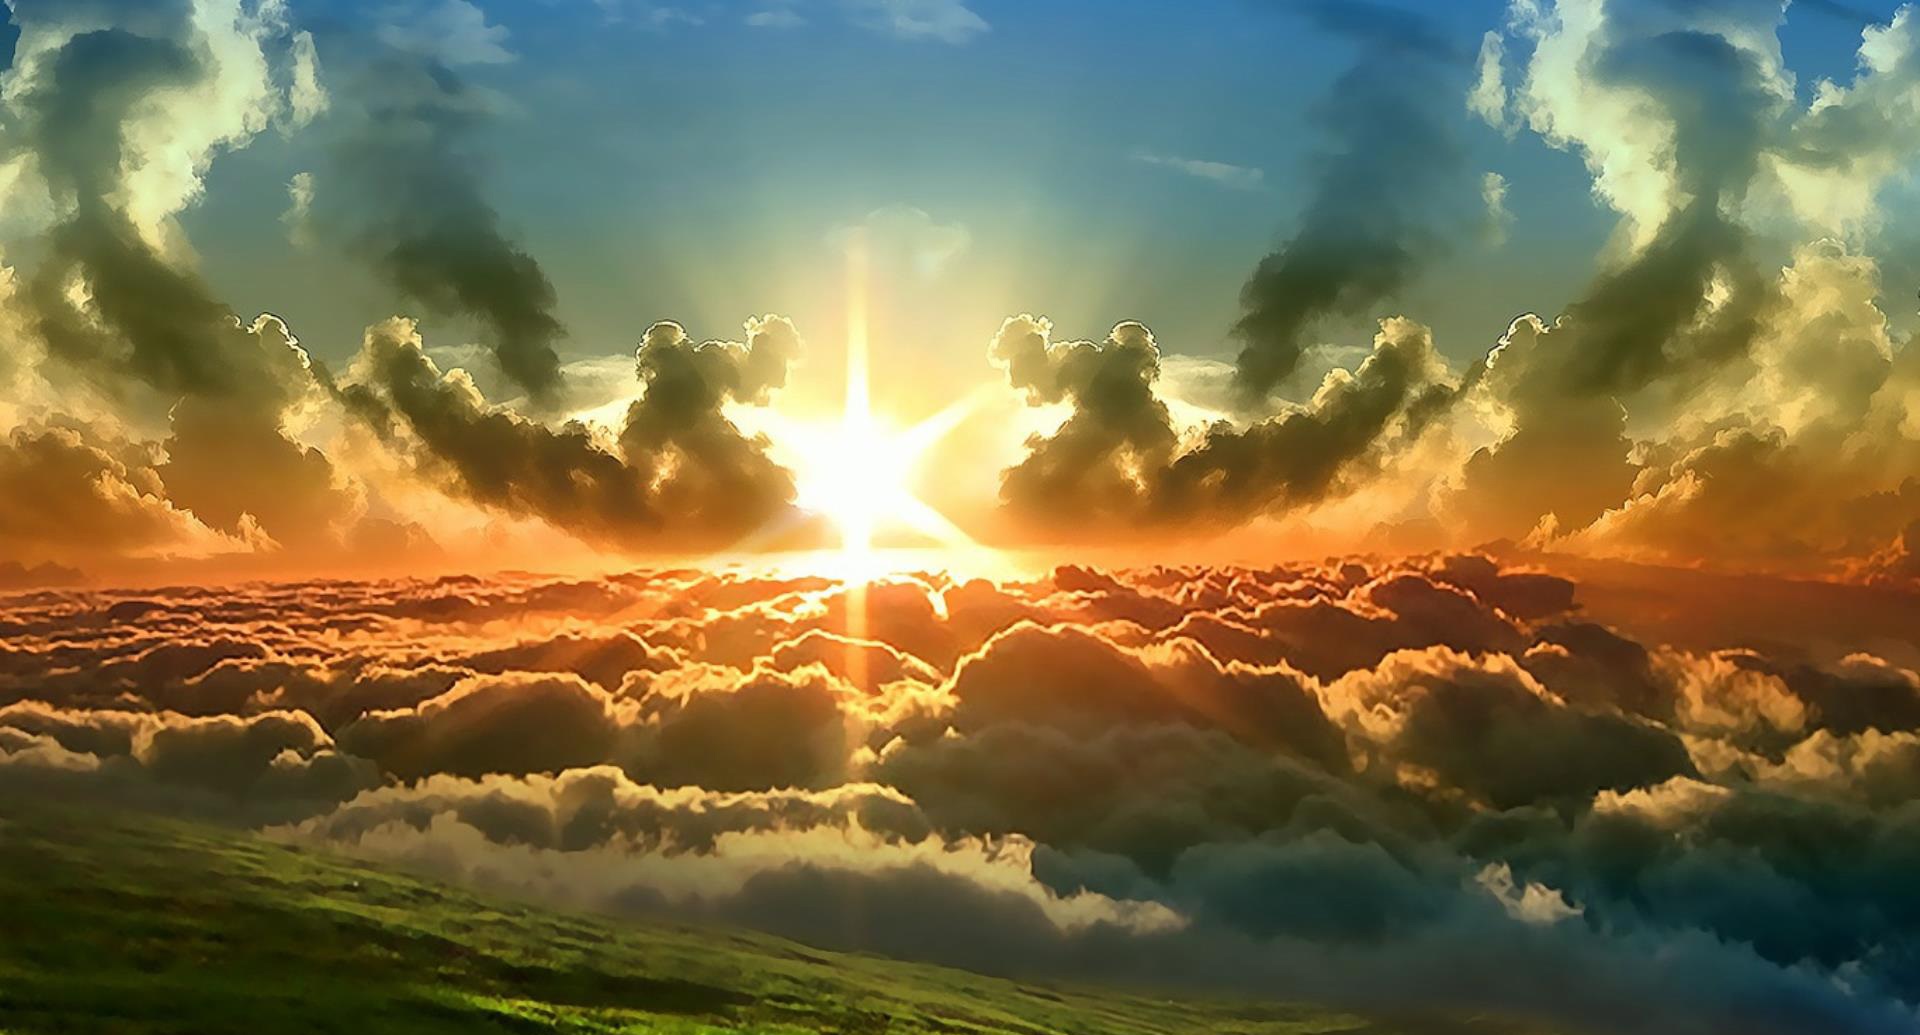 sm37_sun-and-clouds-nature-hd-wallpapers.jpg